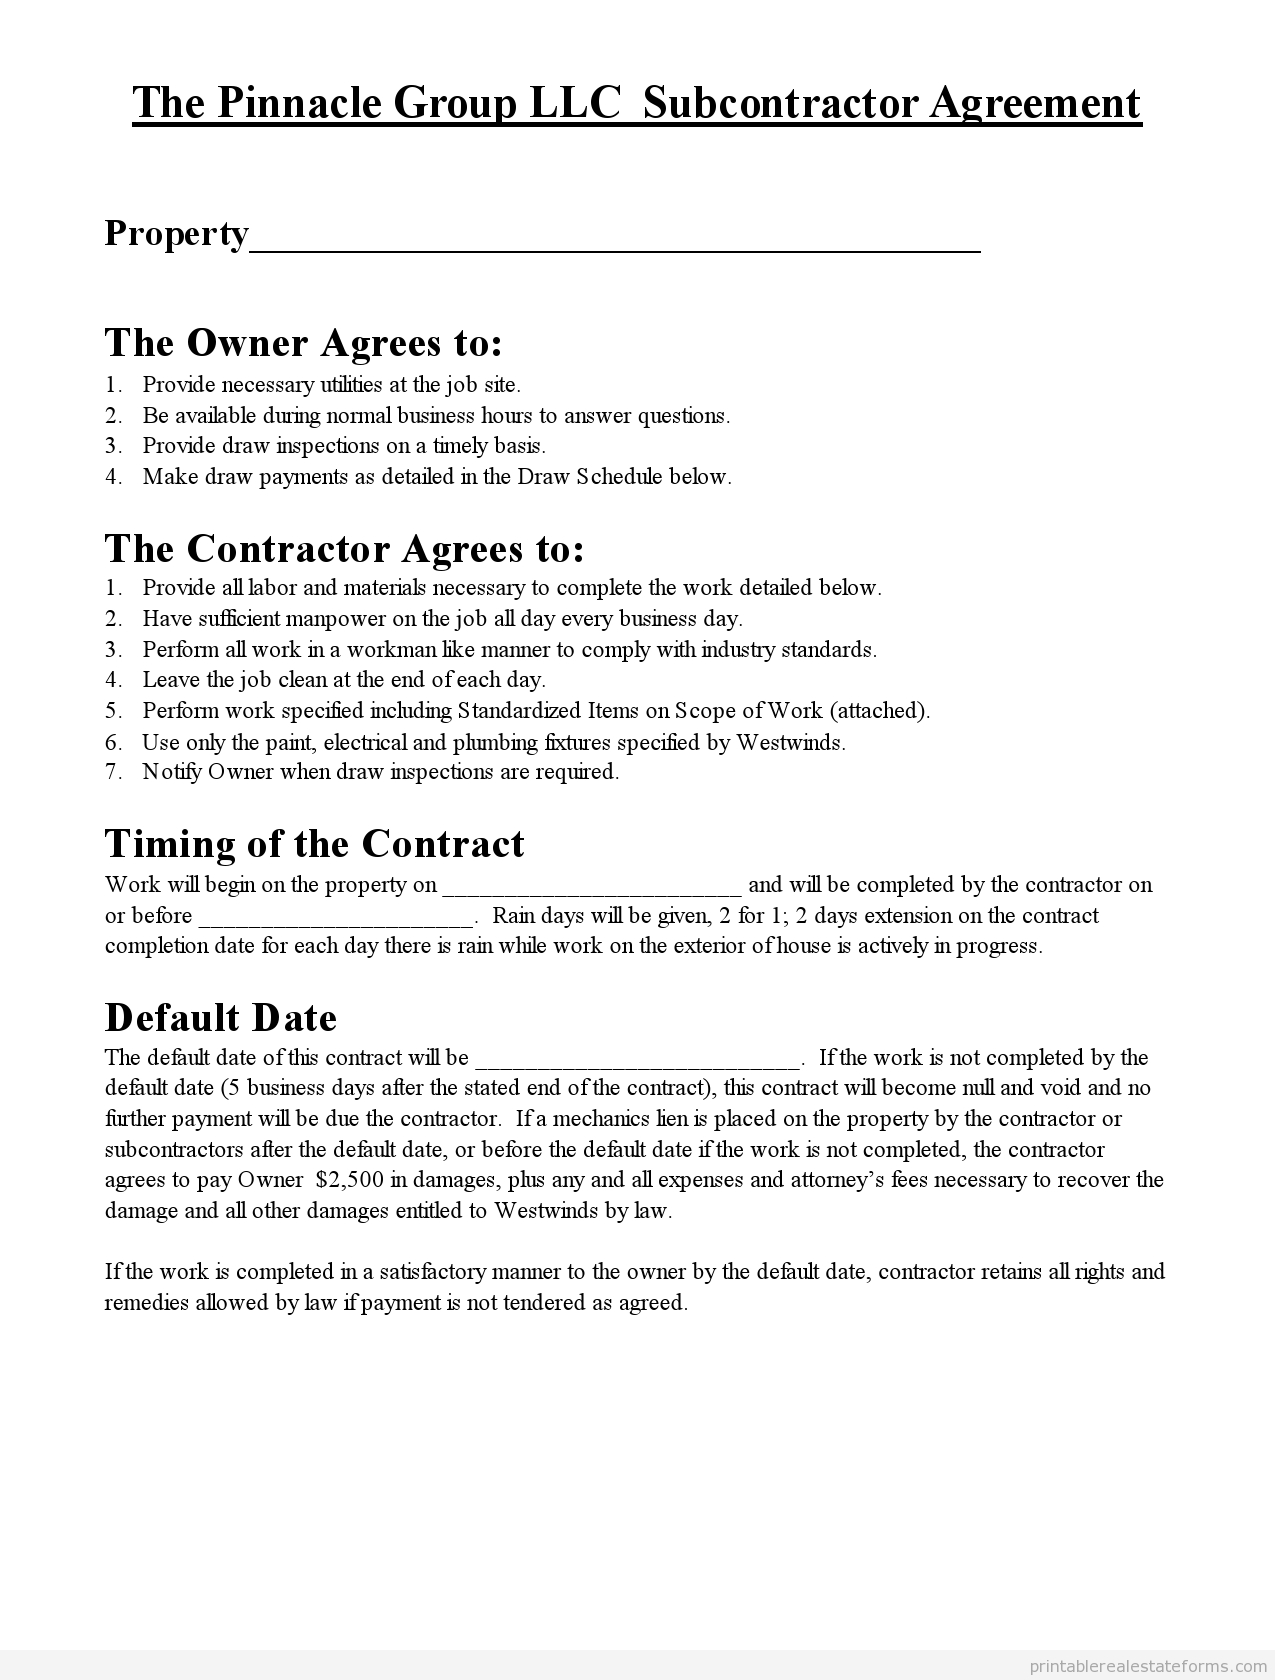 Free Subcontractor Agreement Template Australia Subcontractor Agreement Template Free Pin Picshy Photoshop